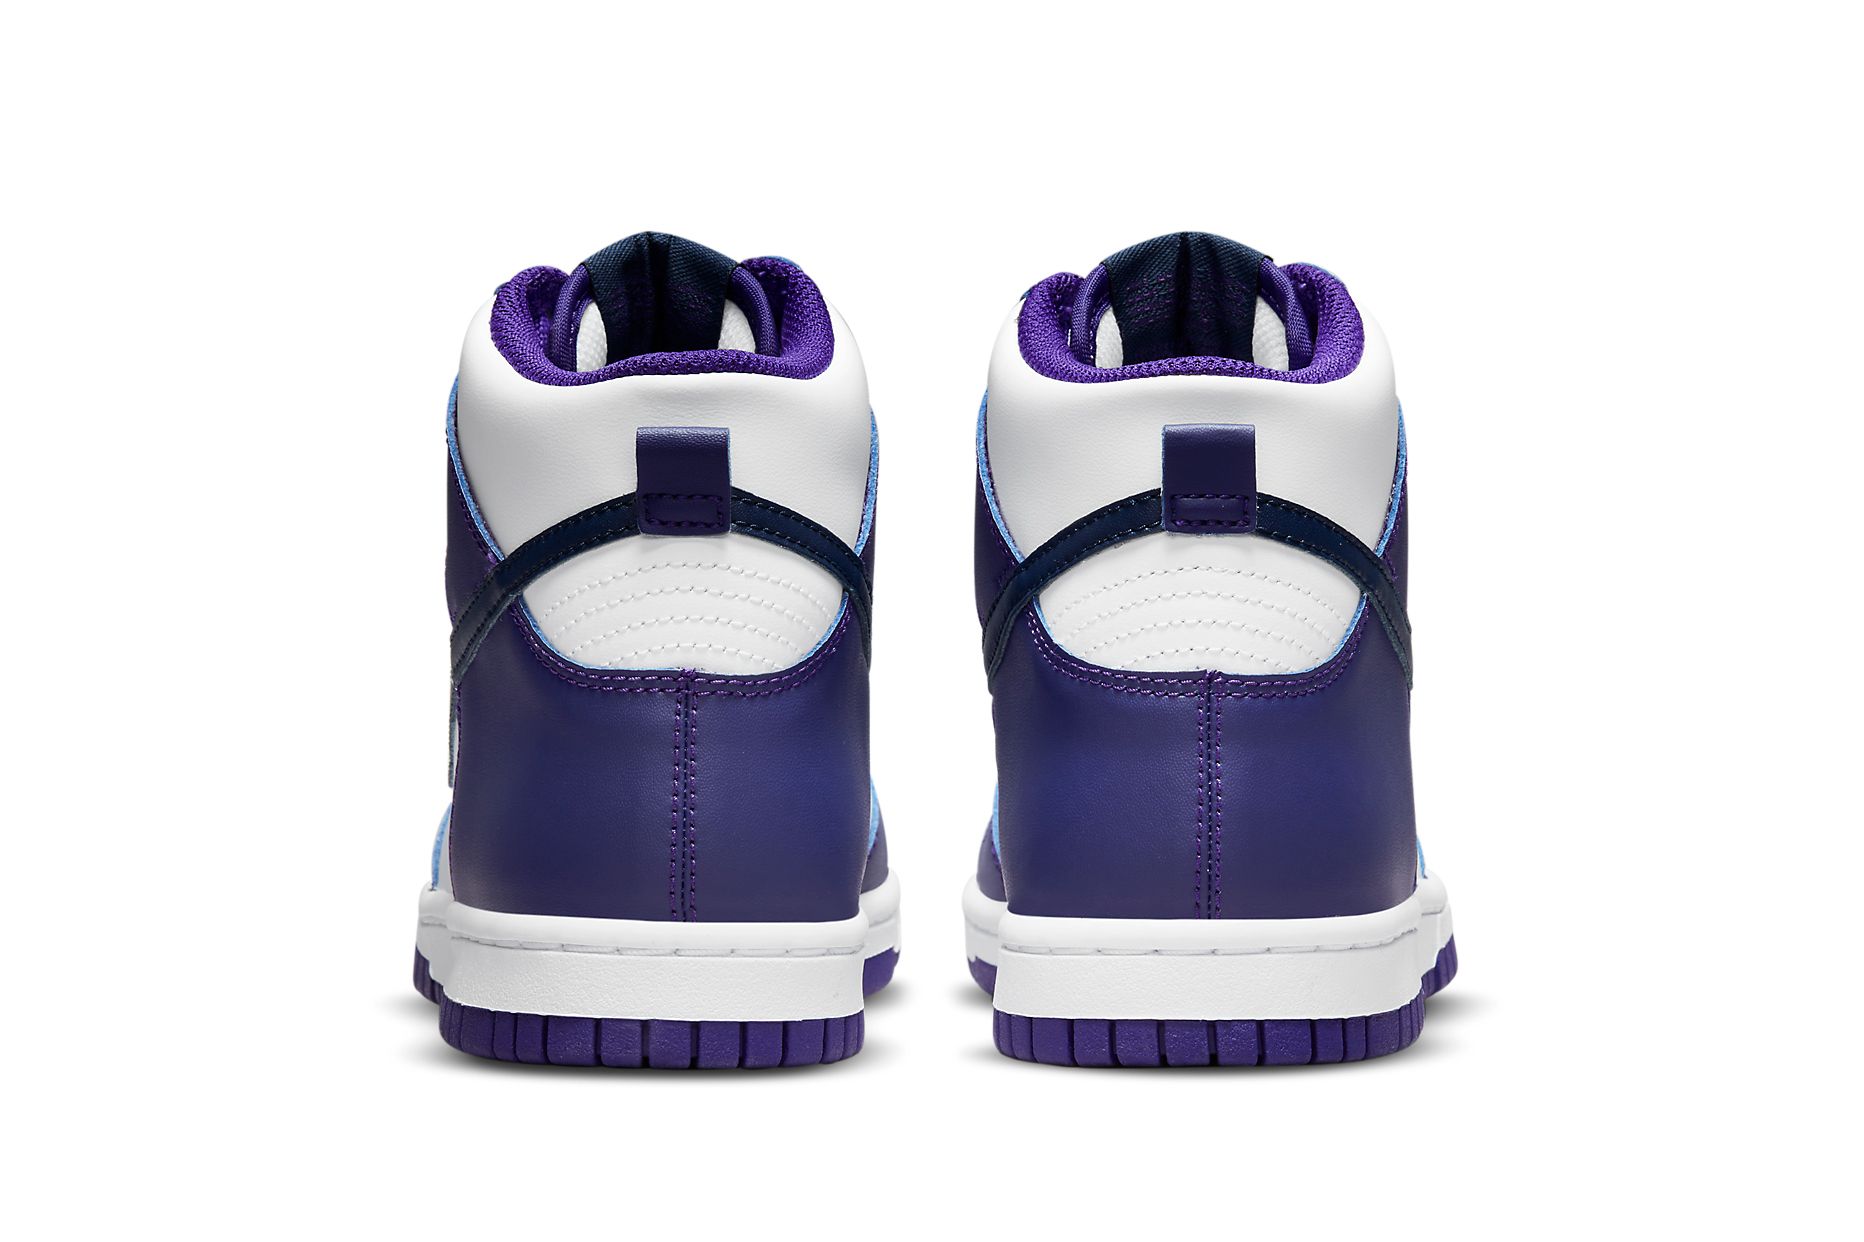 Navy Courts Purple on this Nike Dunk High - Sneaker Freaker